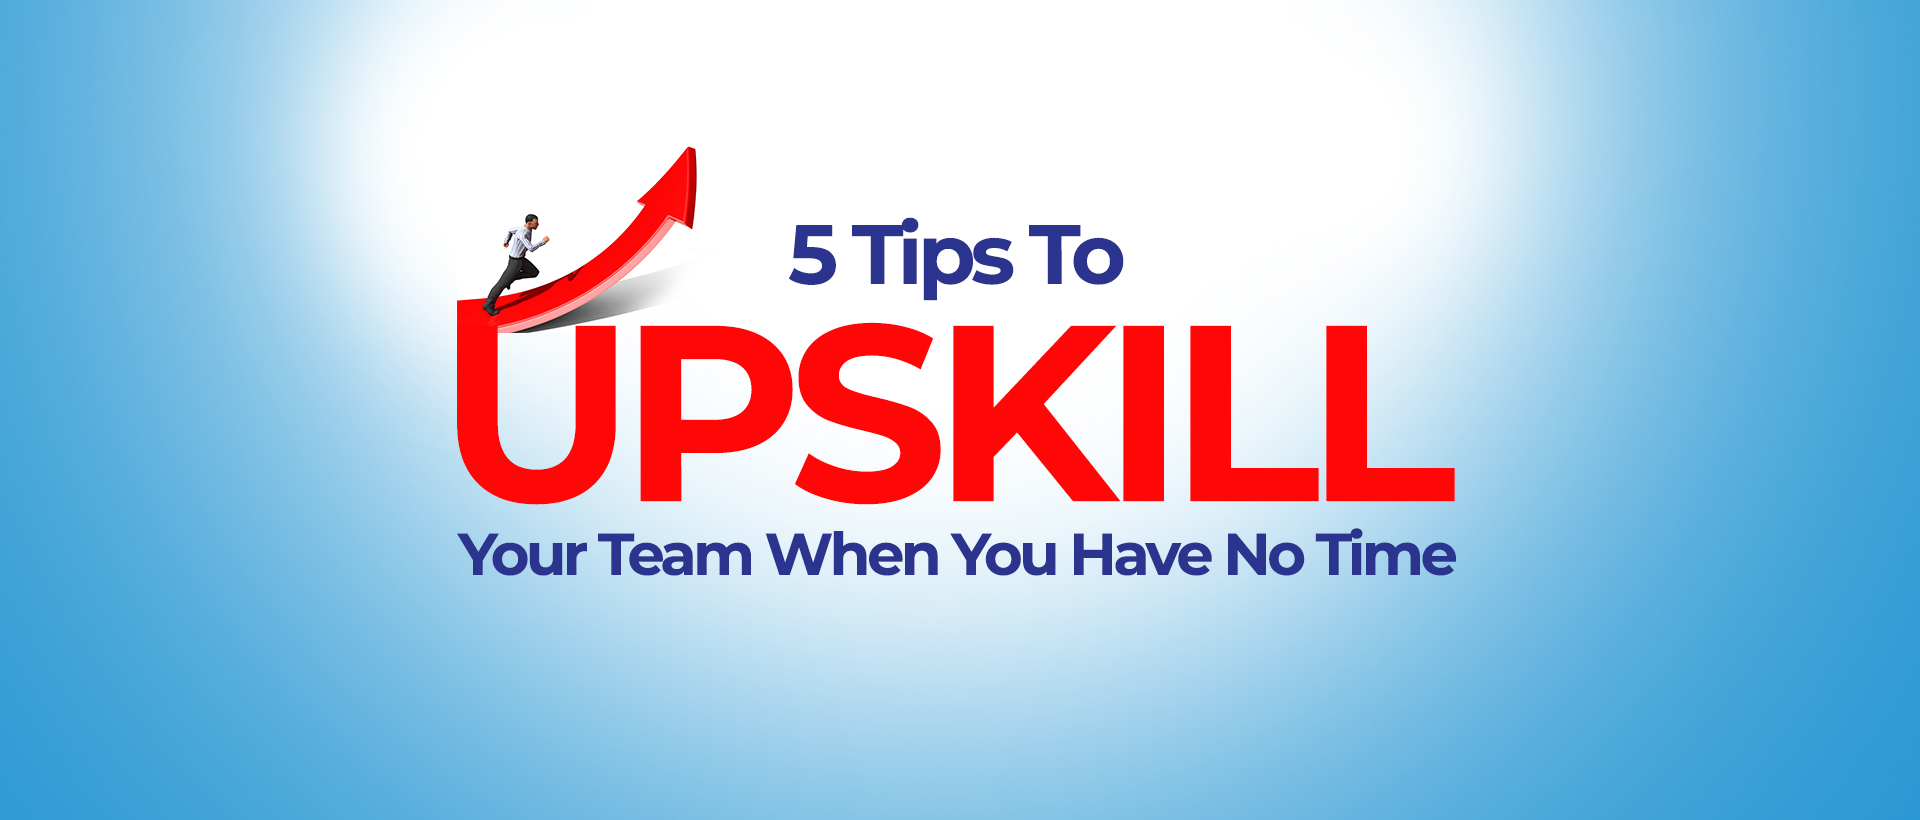 5 Tips To Upskill Your Team When You Have No Time